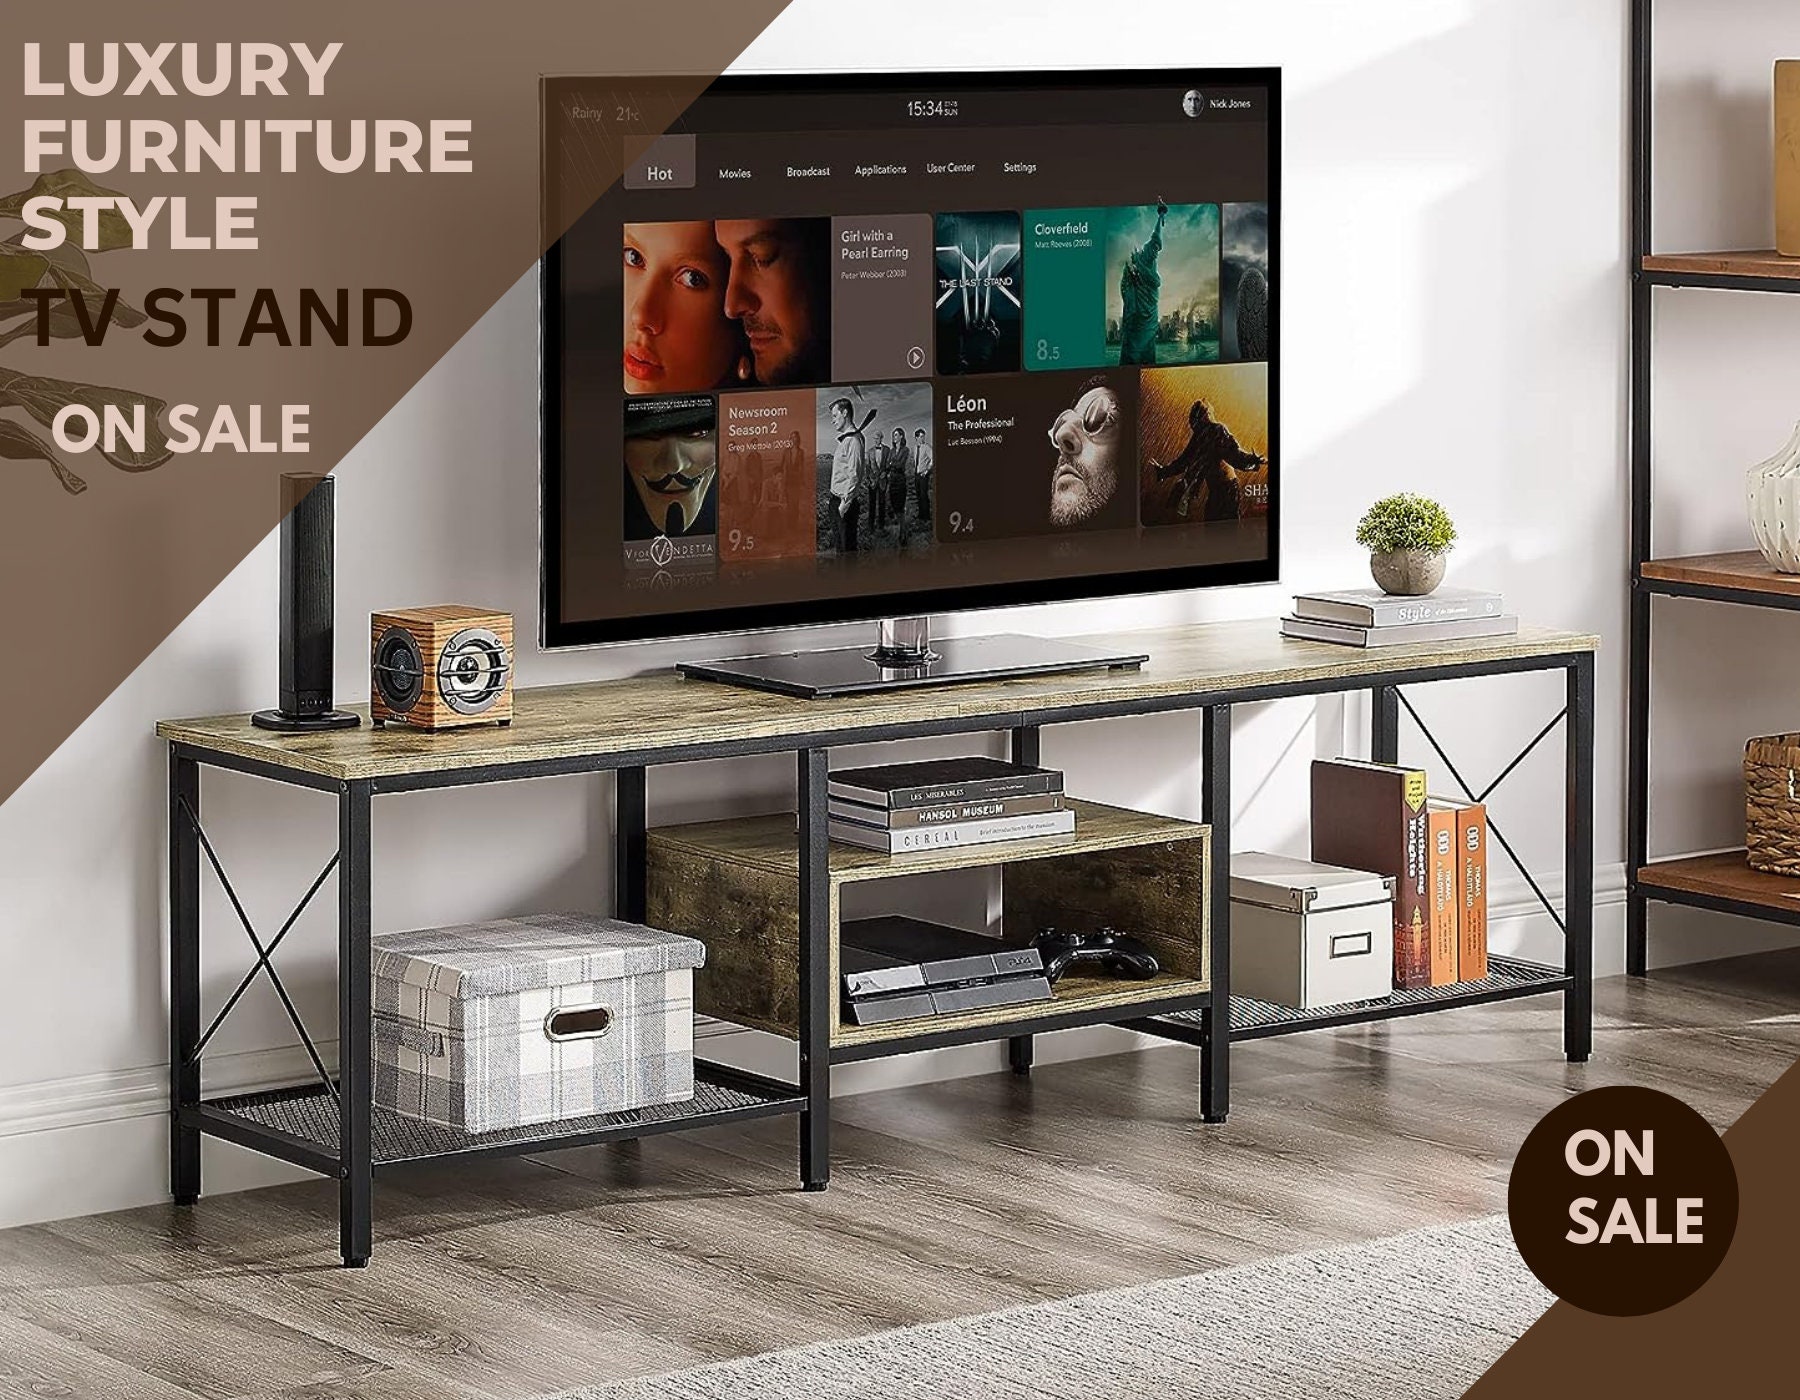 Tall Tv Stand - Etsy